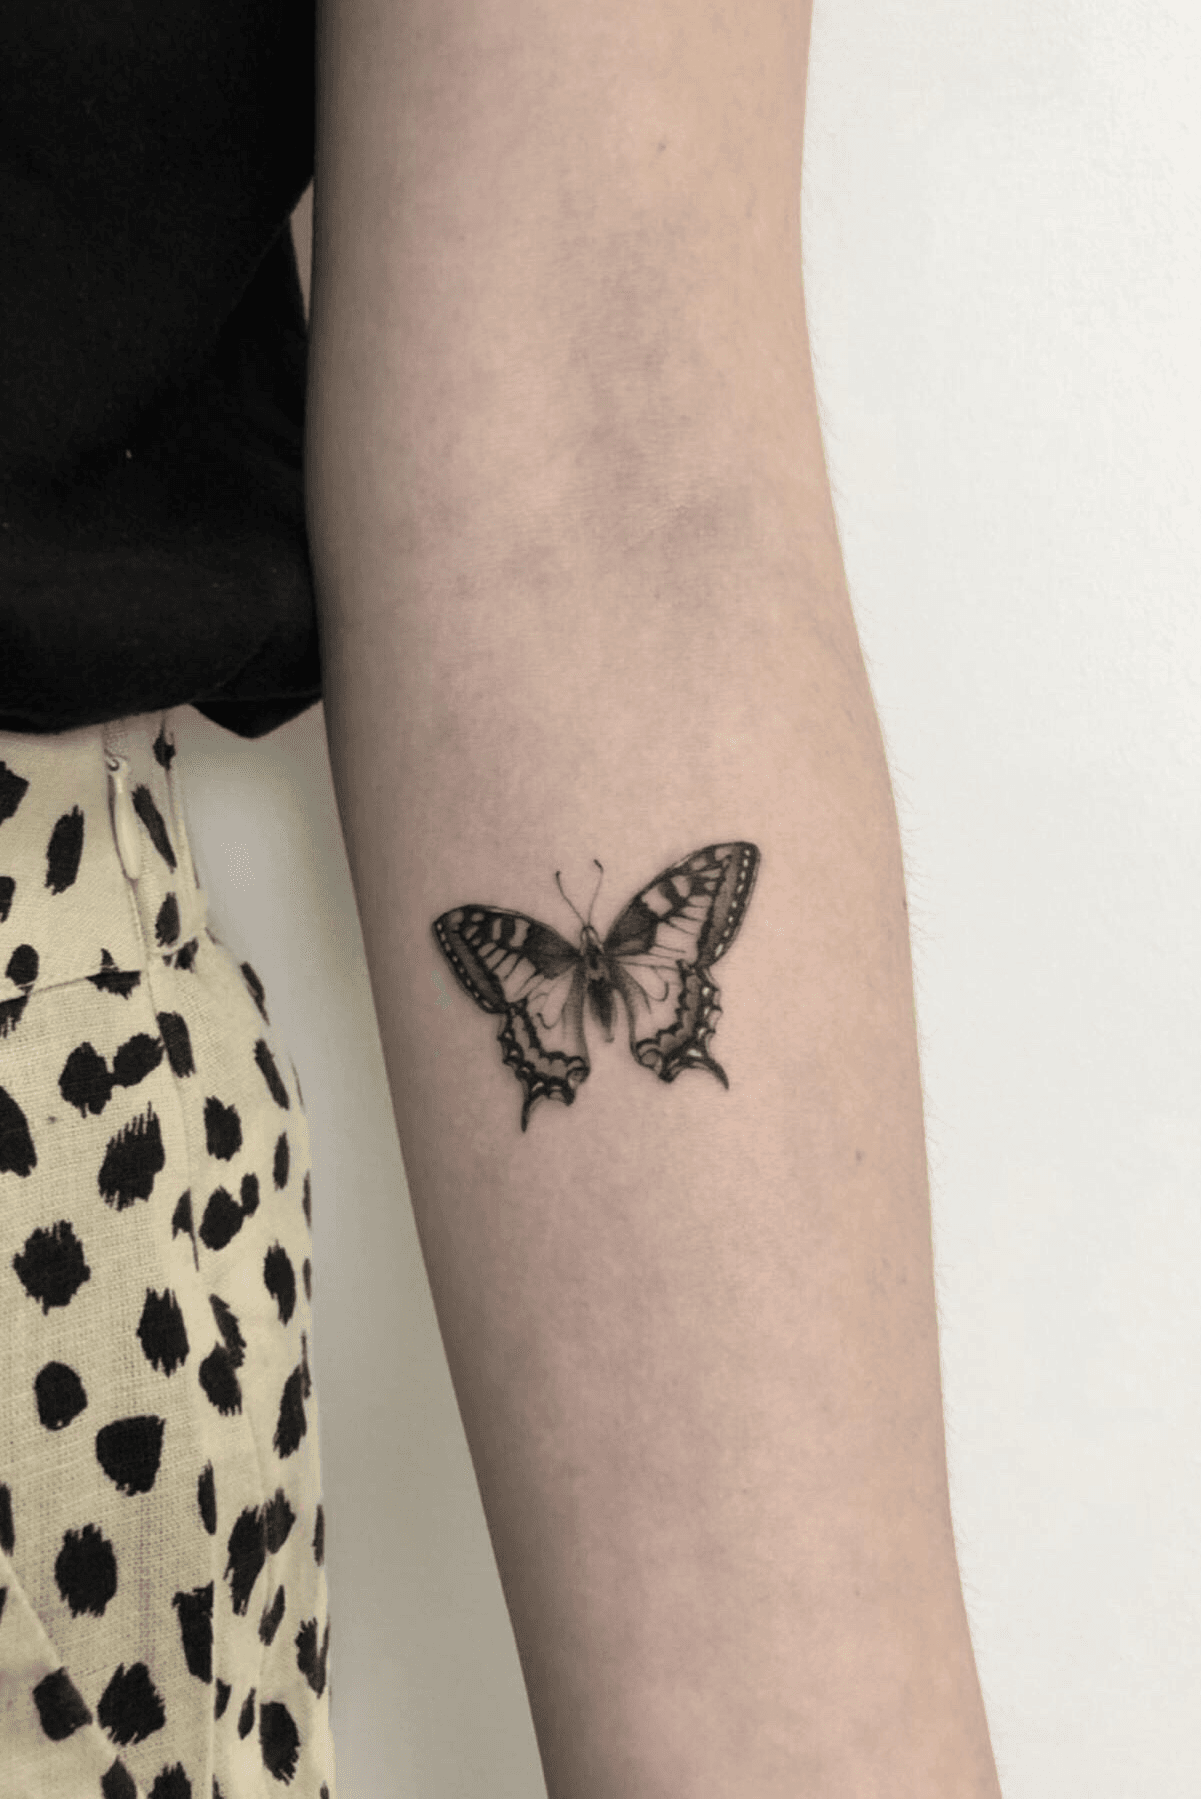 64 Single Needle Tattoo Designs To Get With Precision